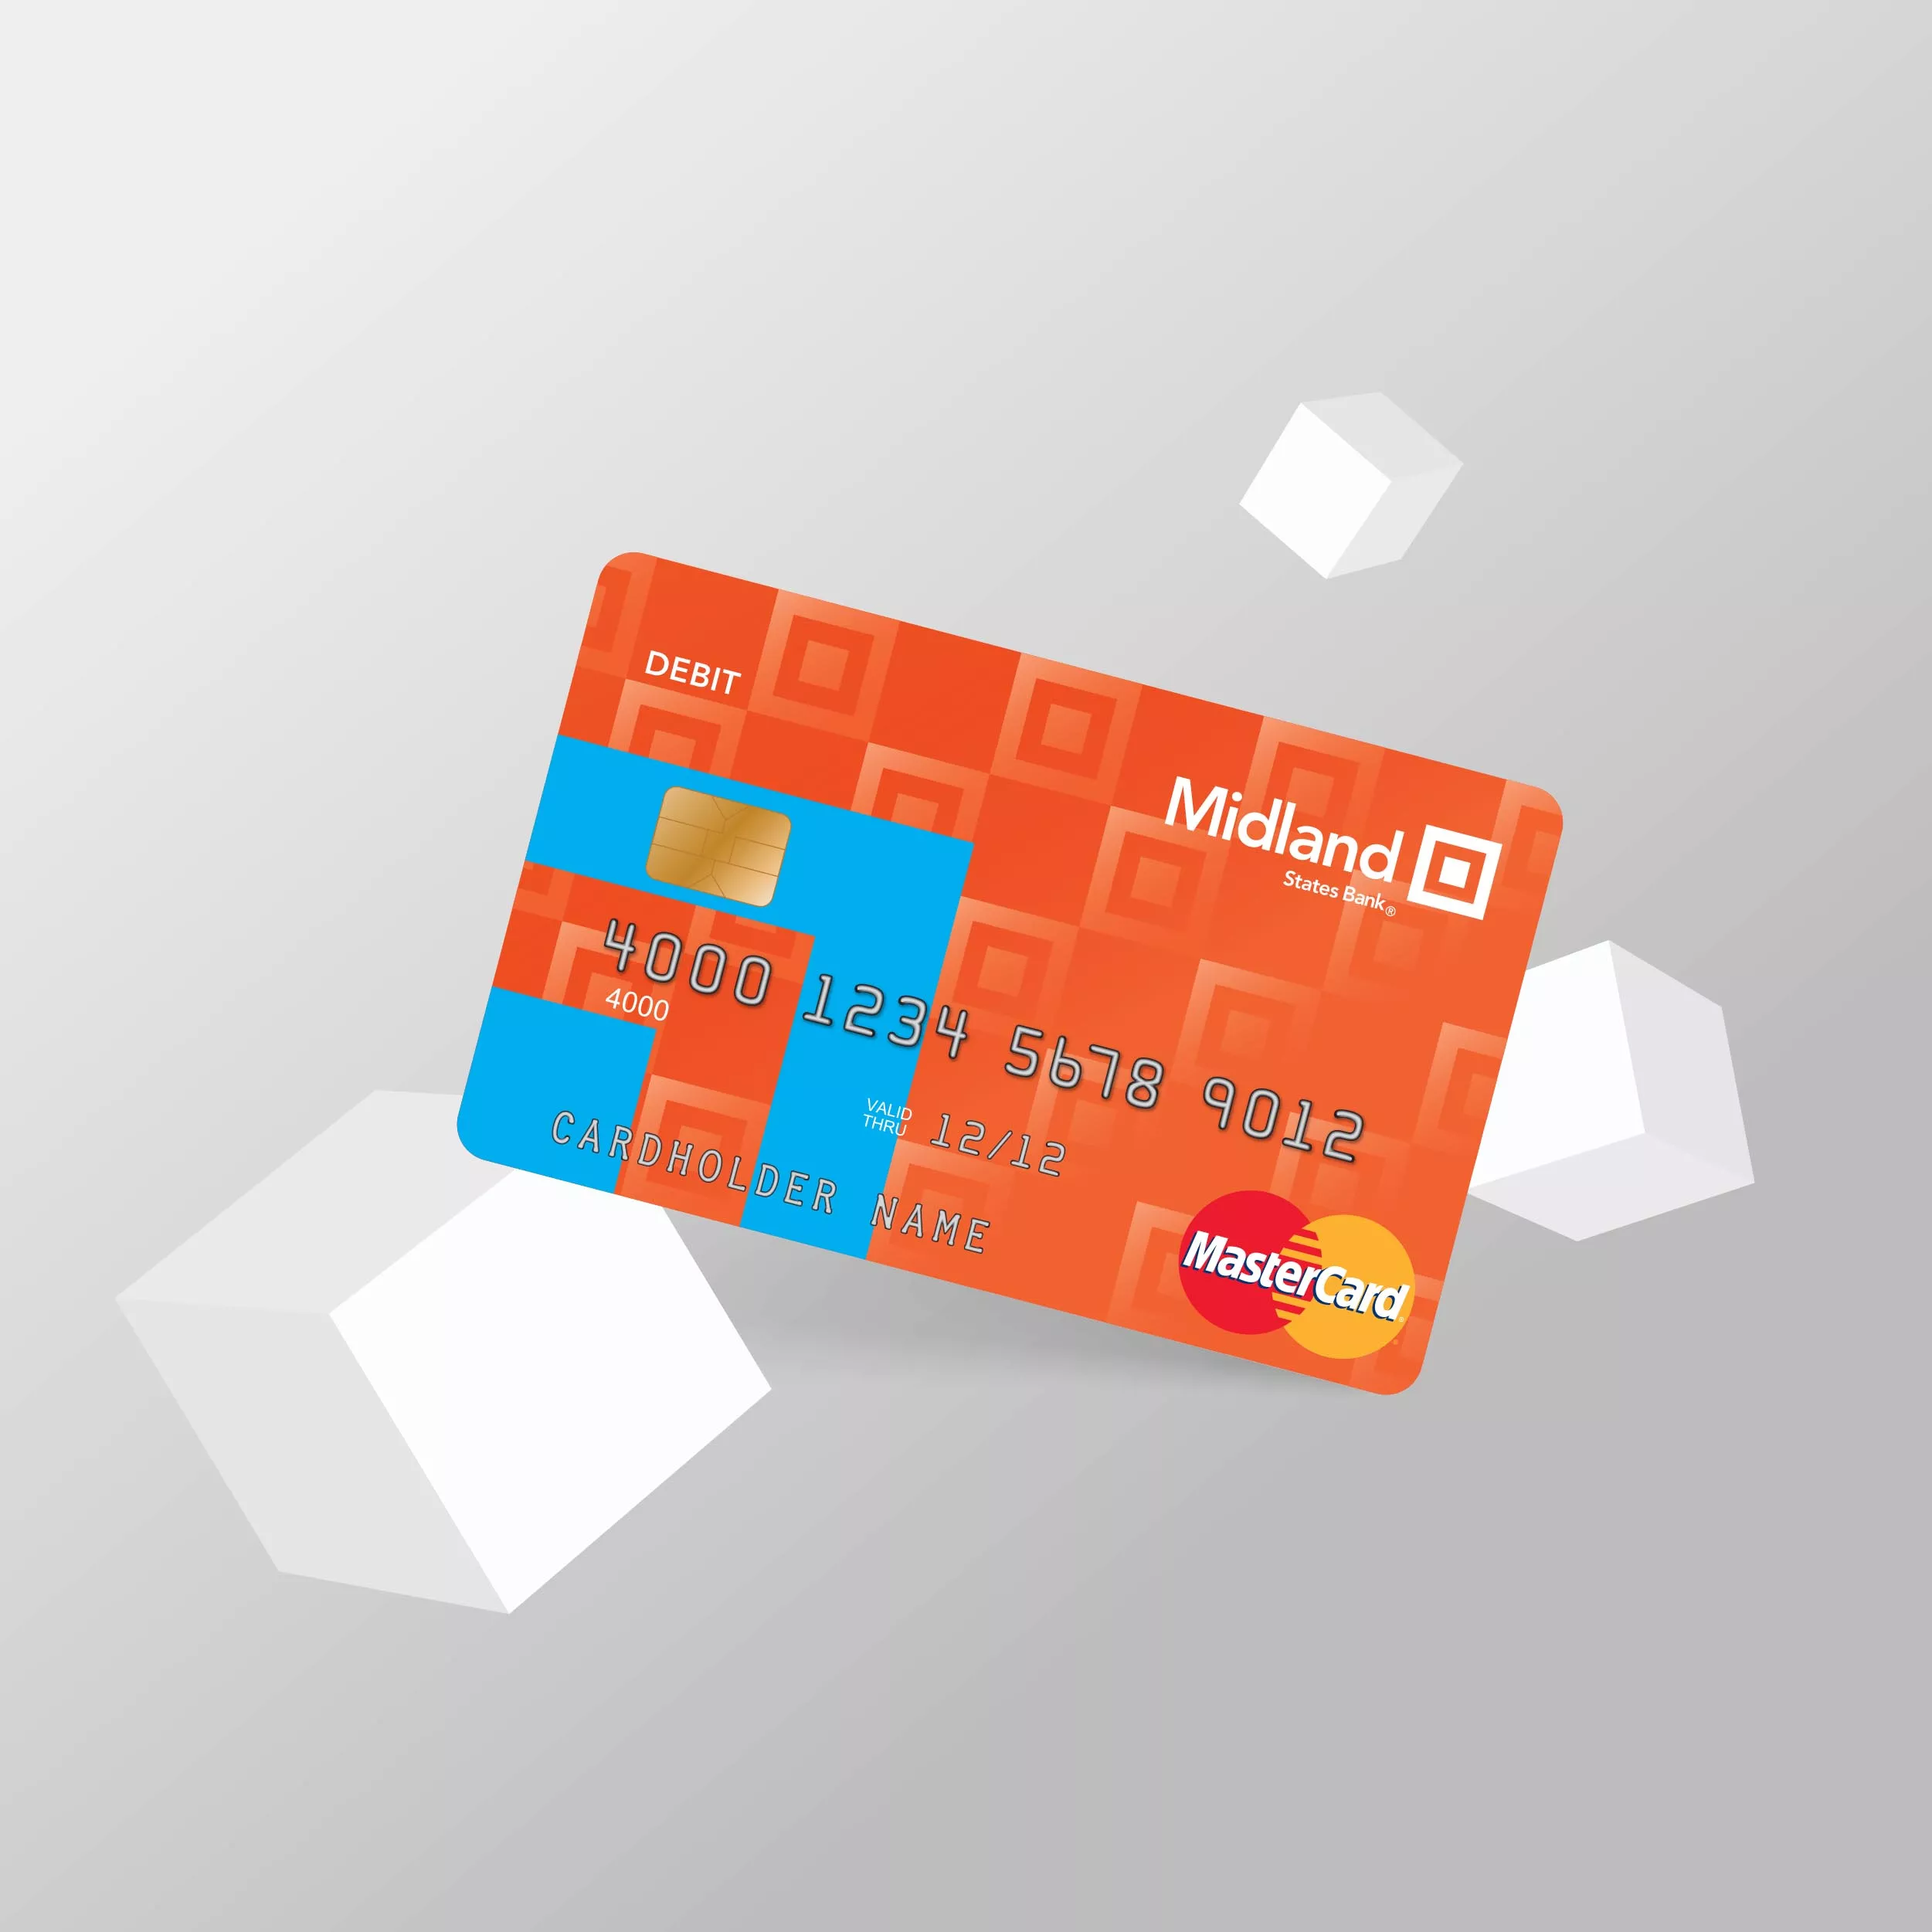 personal debit card on grey background